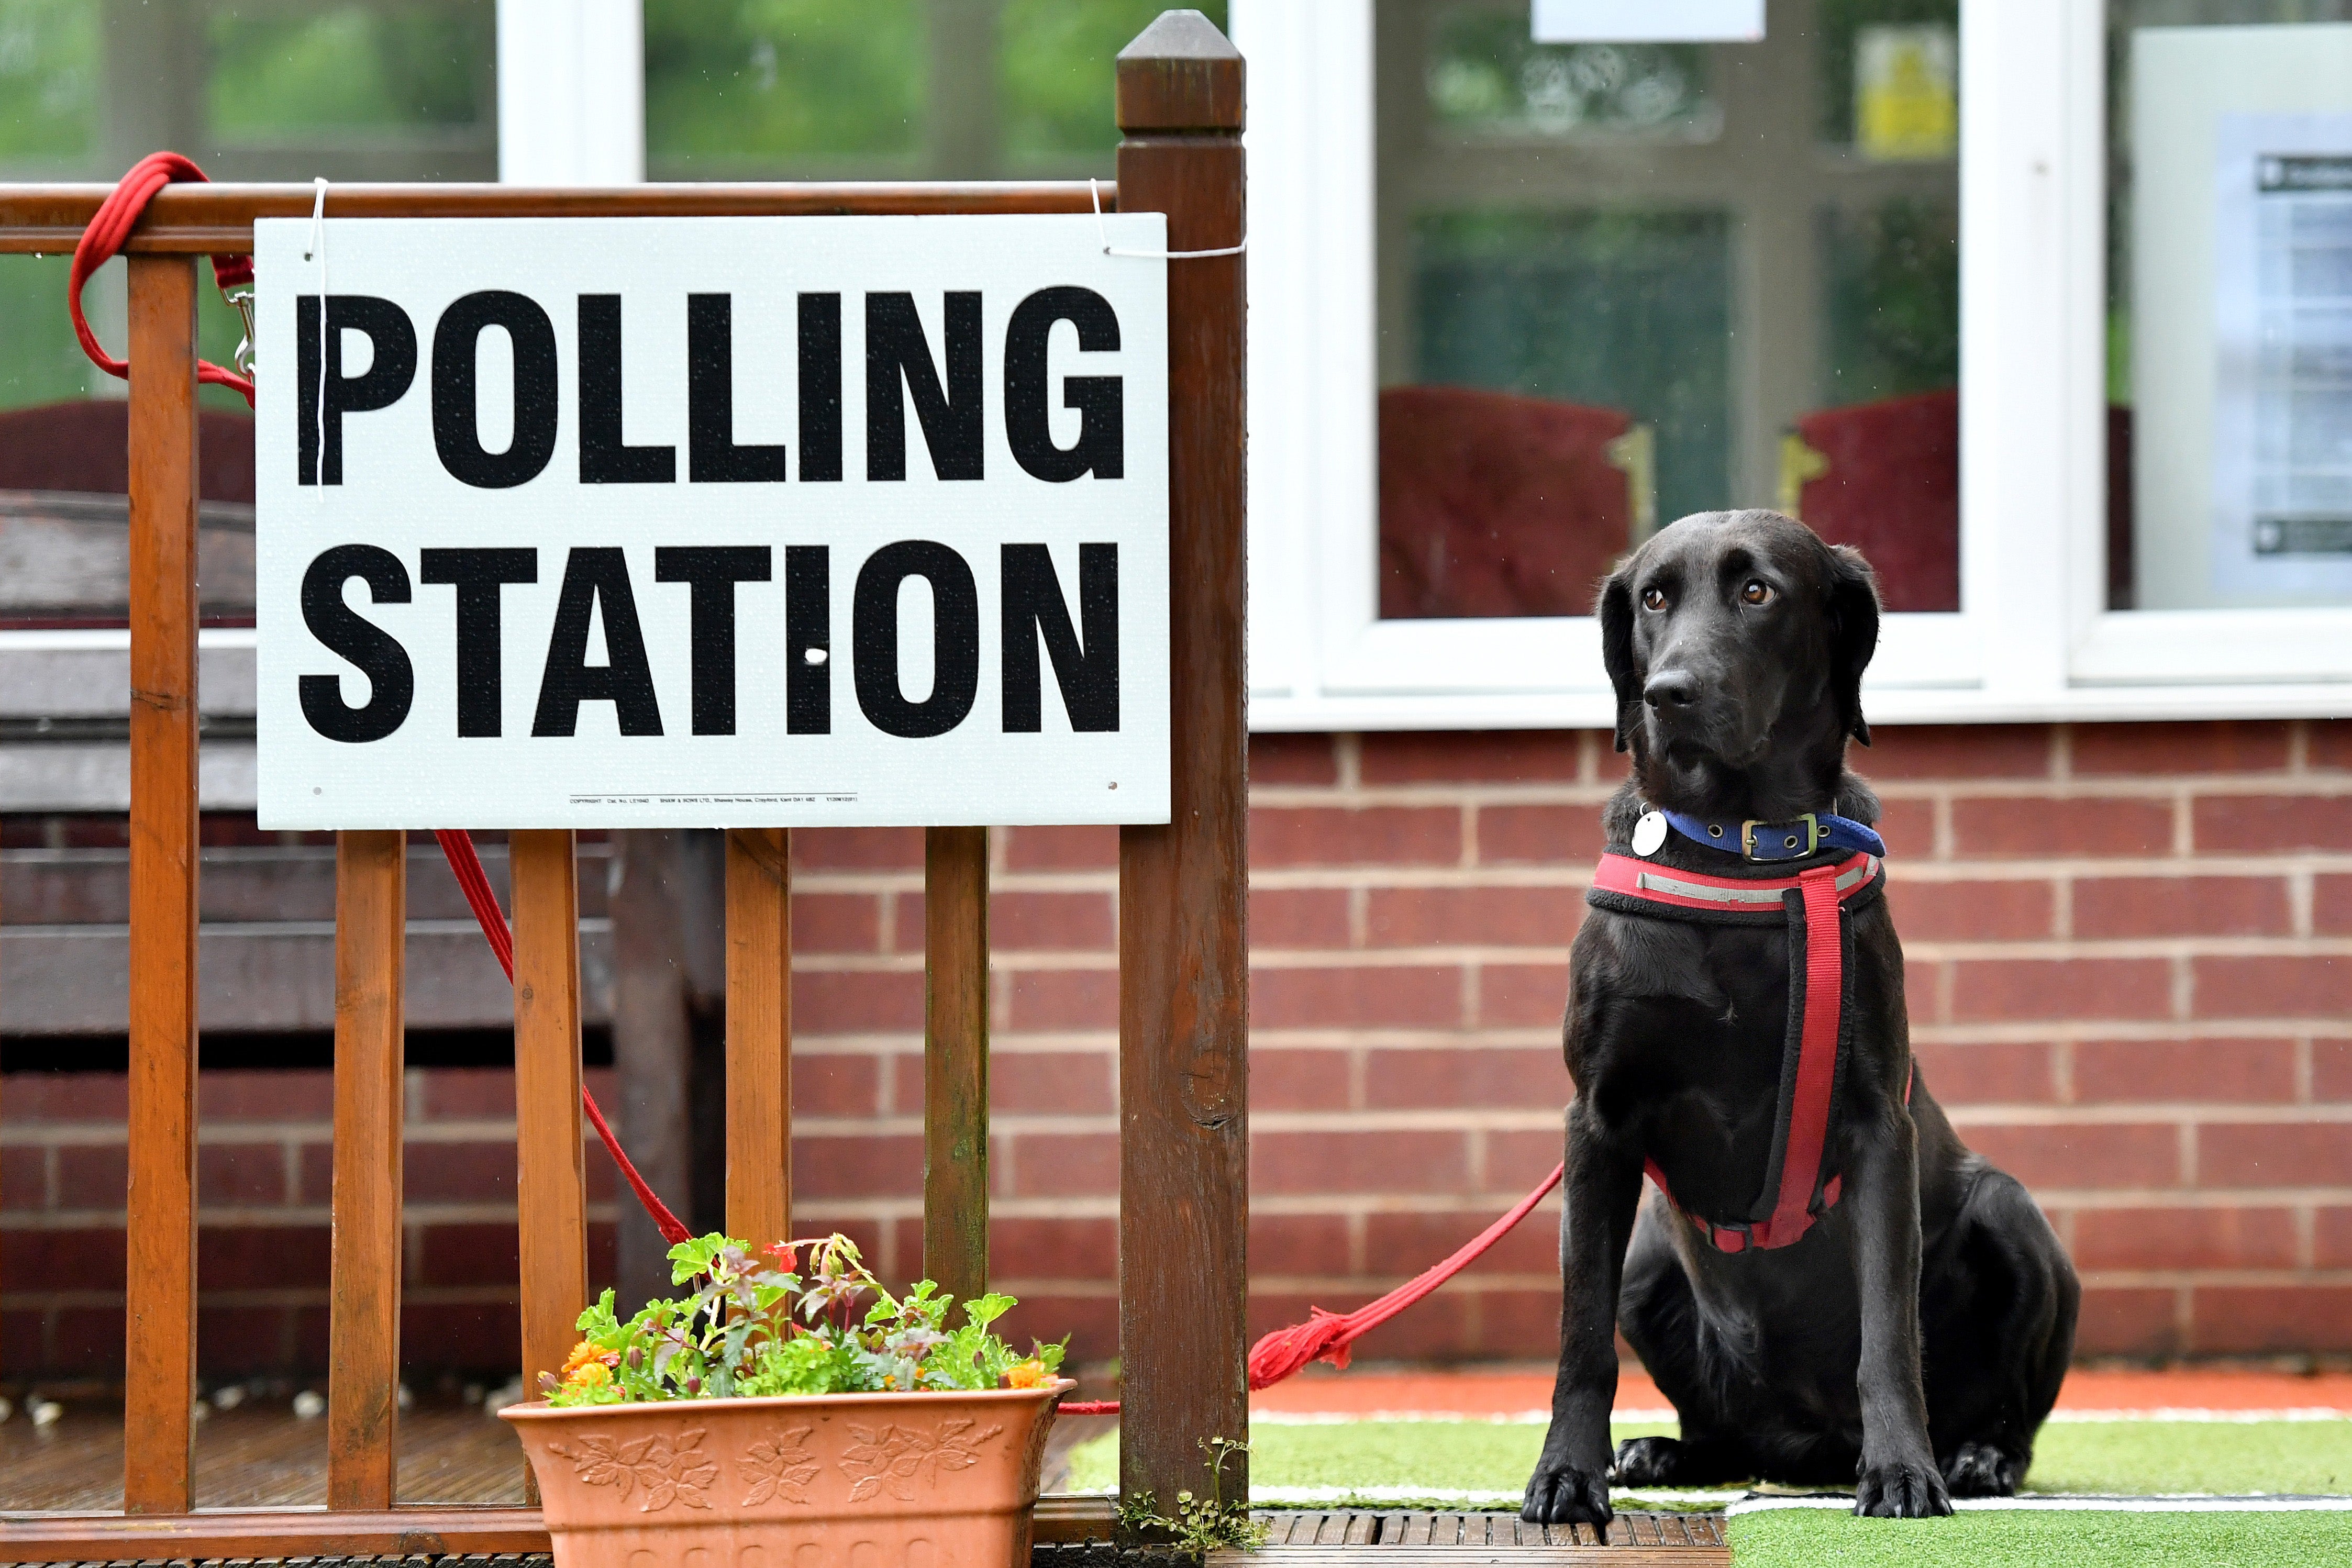 Yes, you can bring your dog to the polling station